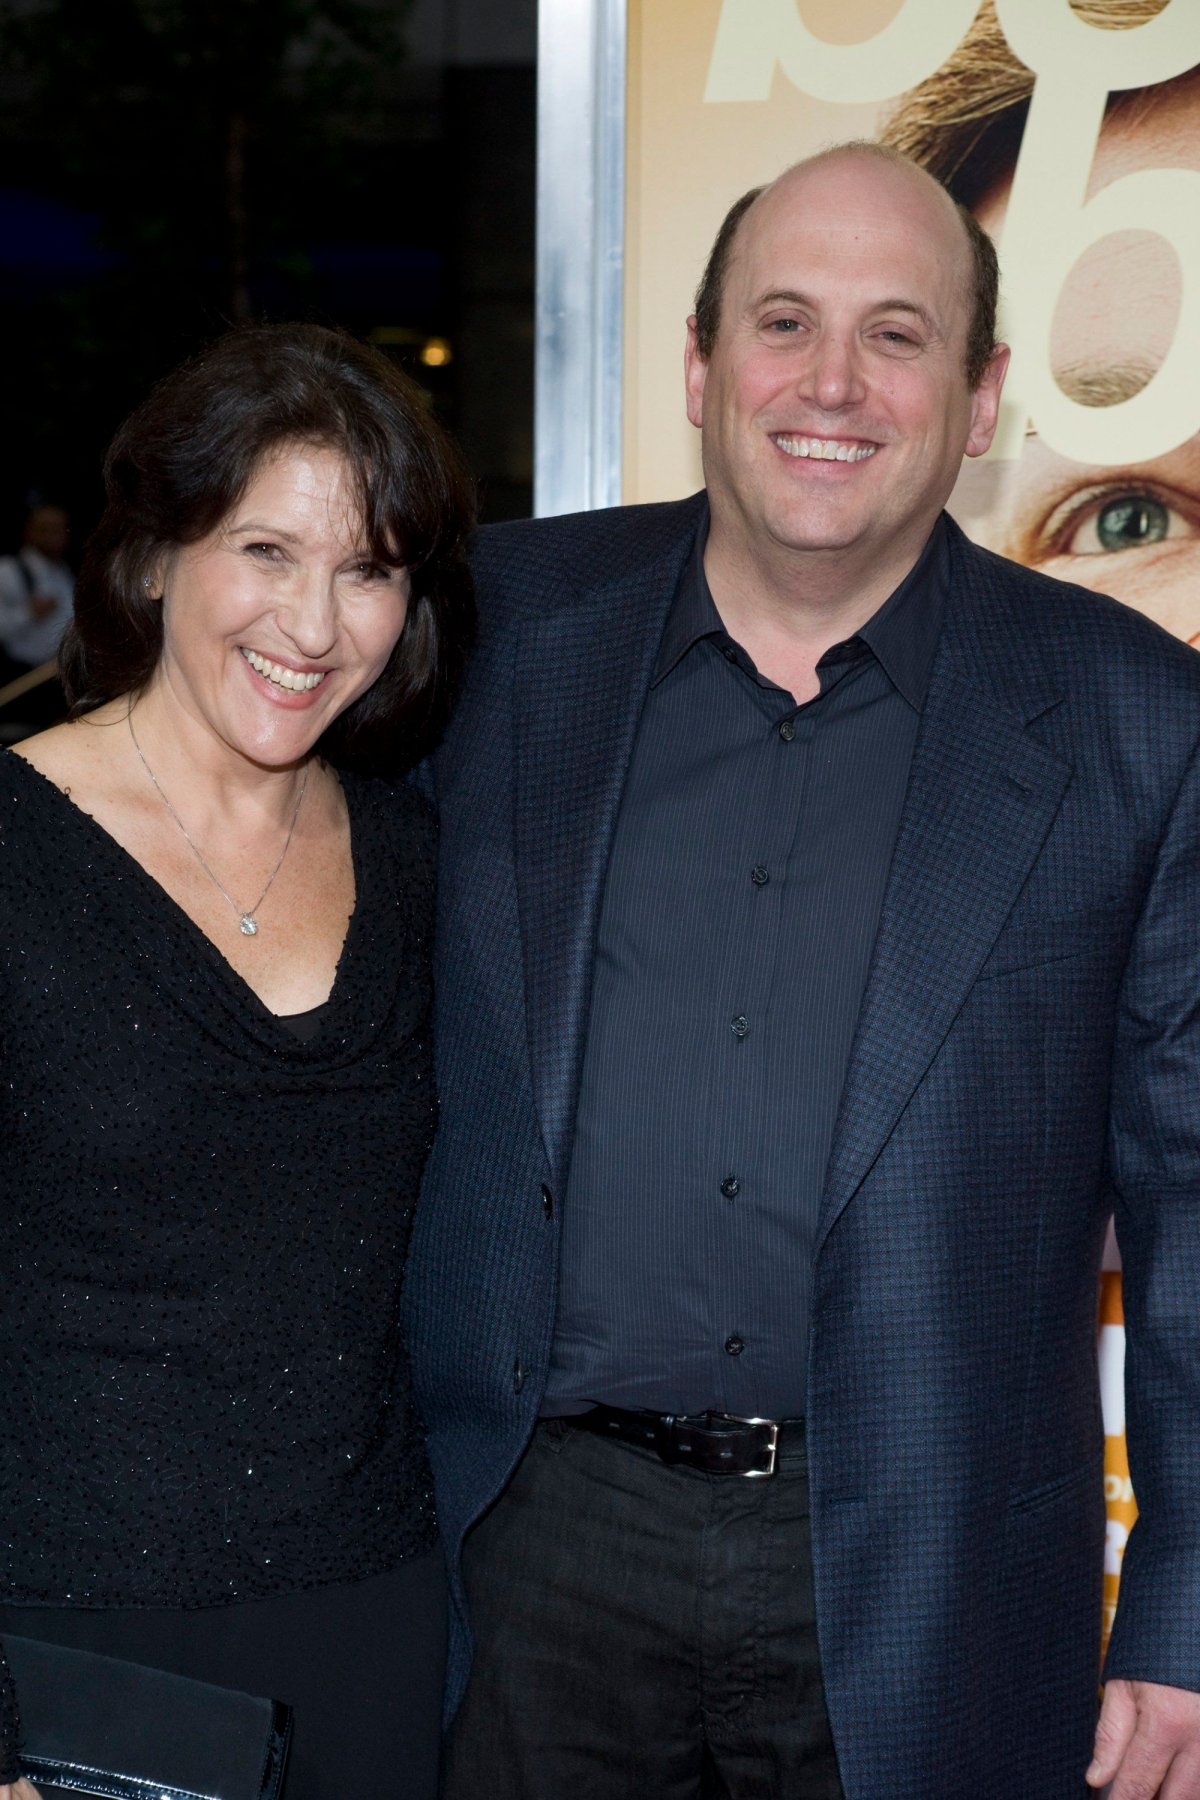 Kurt Eichenwald and his wife arrive for the premiere of "The Informant" at the Ziegfeld Theatre in New York, NY on Sept. 15, 2009.